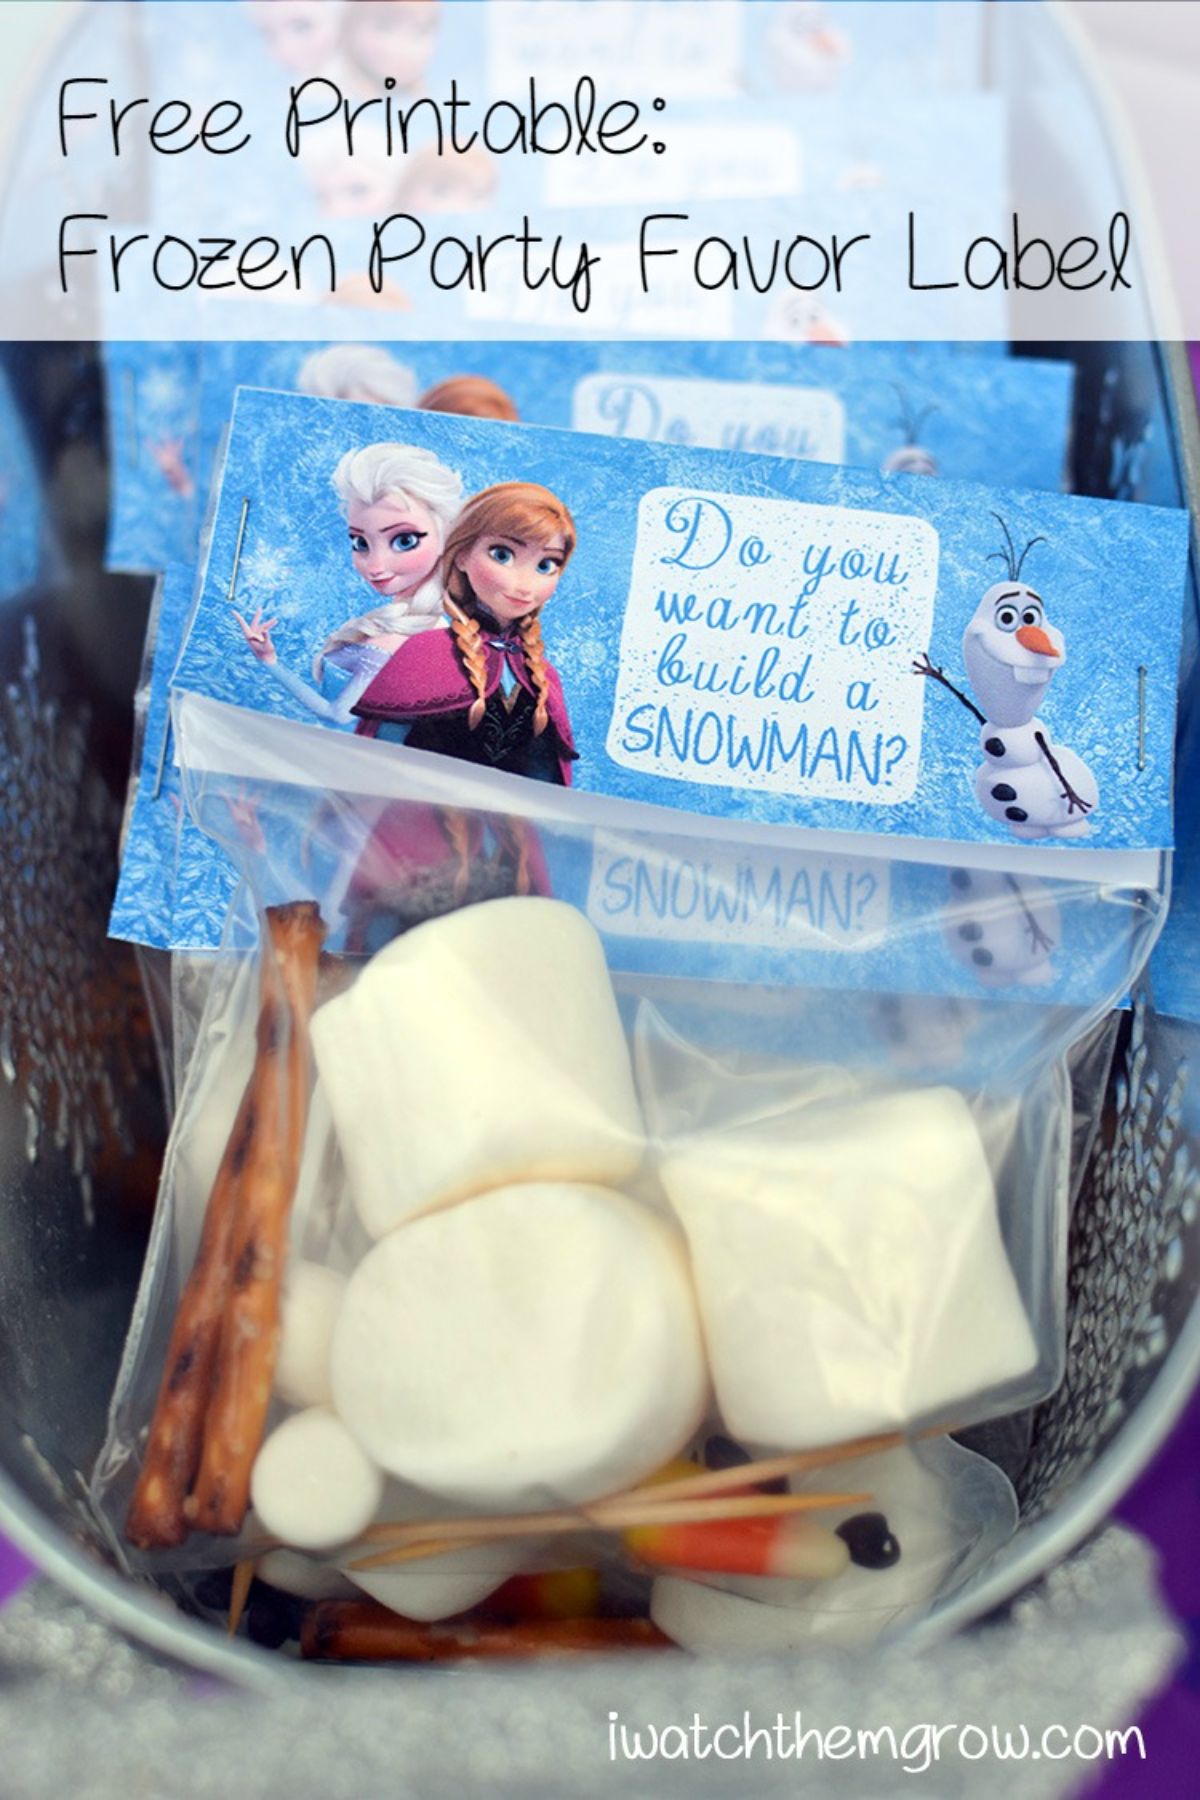 a basket of plastic parcels filled with marshmallows, twiglets and cocktails sticks. They are labelled "Do you want to bbuild a snowman" with Frozen disney characters on the label